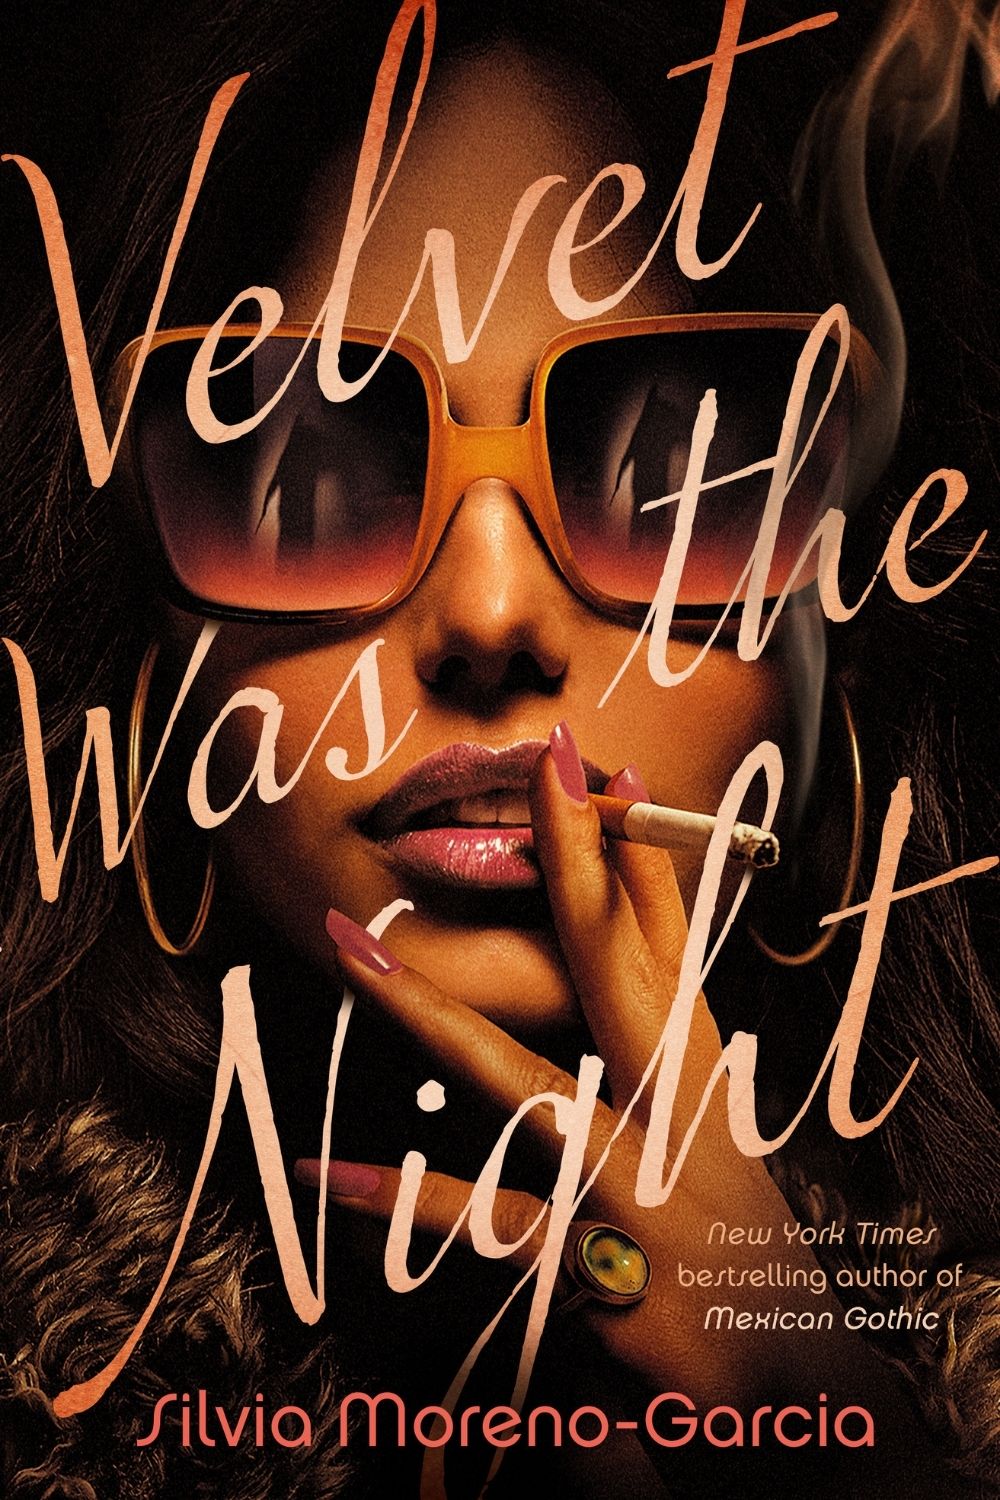 Velvet Was The Night By Silvia Moreno-Garcia | Fast-Paced And Gripping Novel